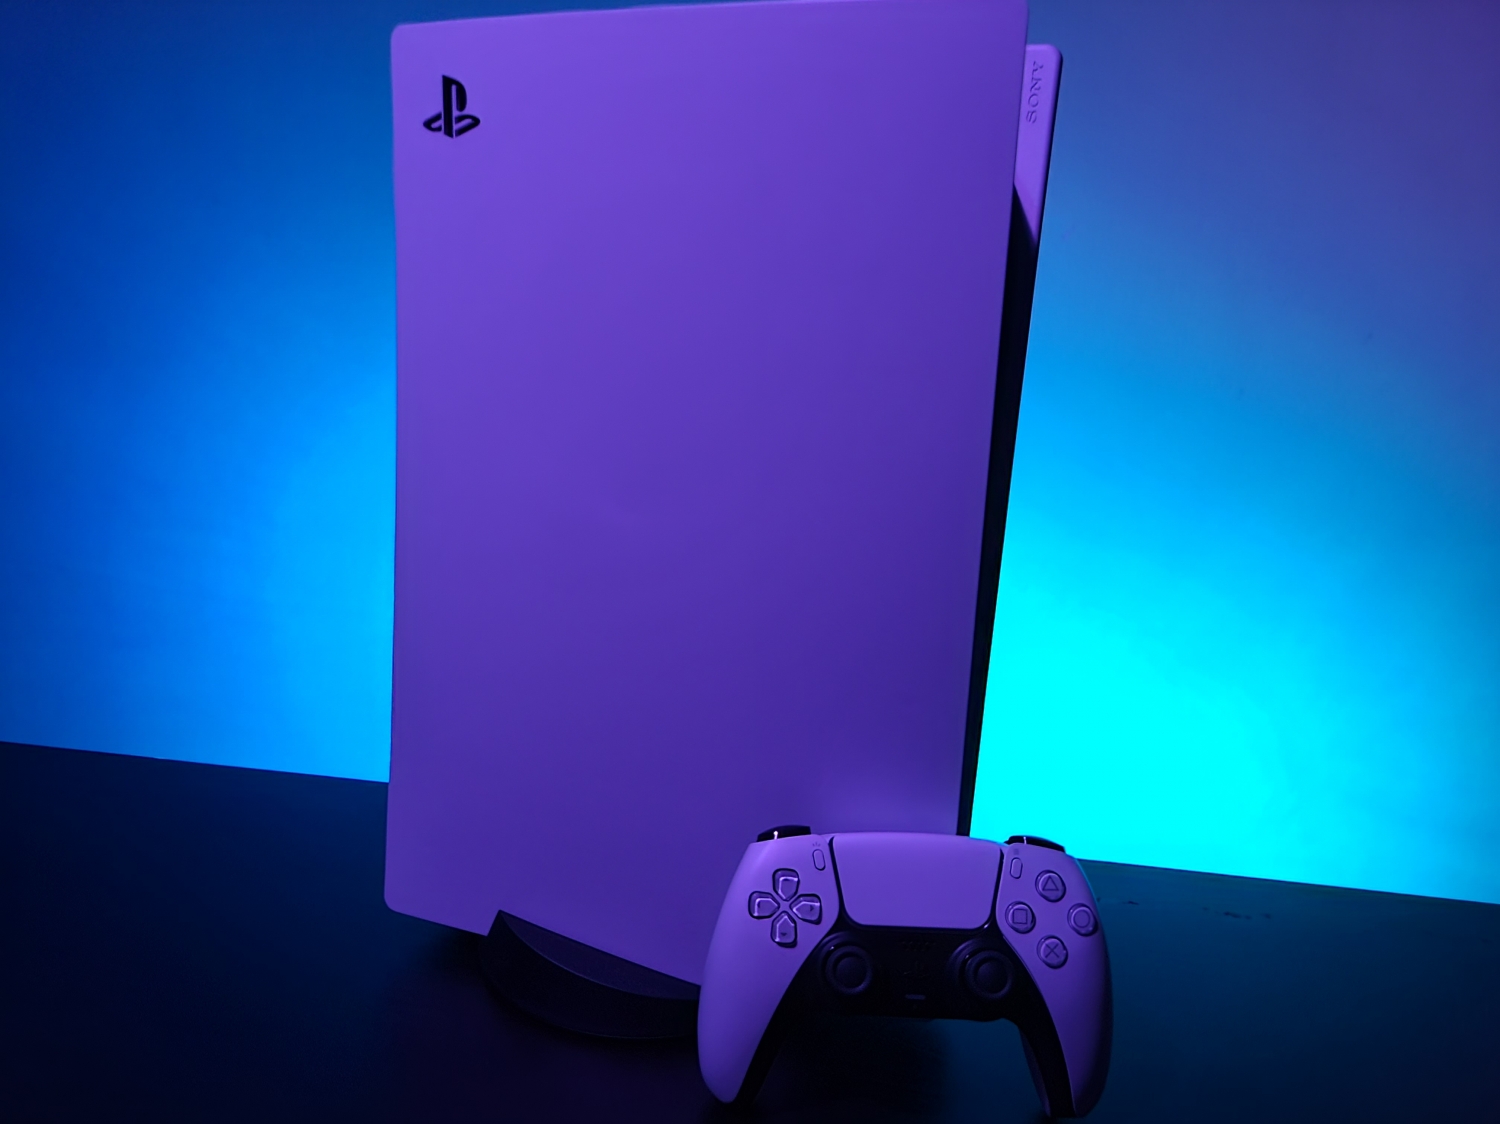 Sony has sold 10 million PS5 consoles